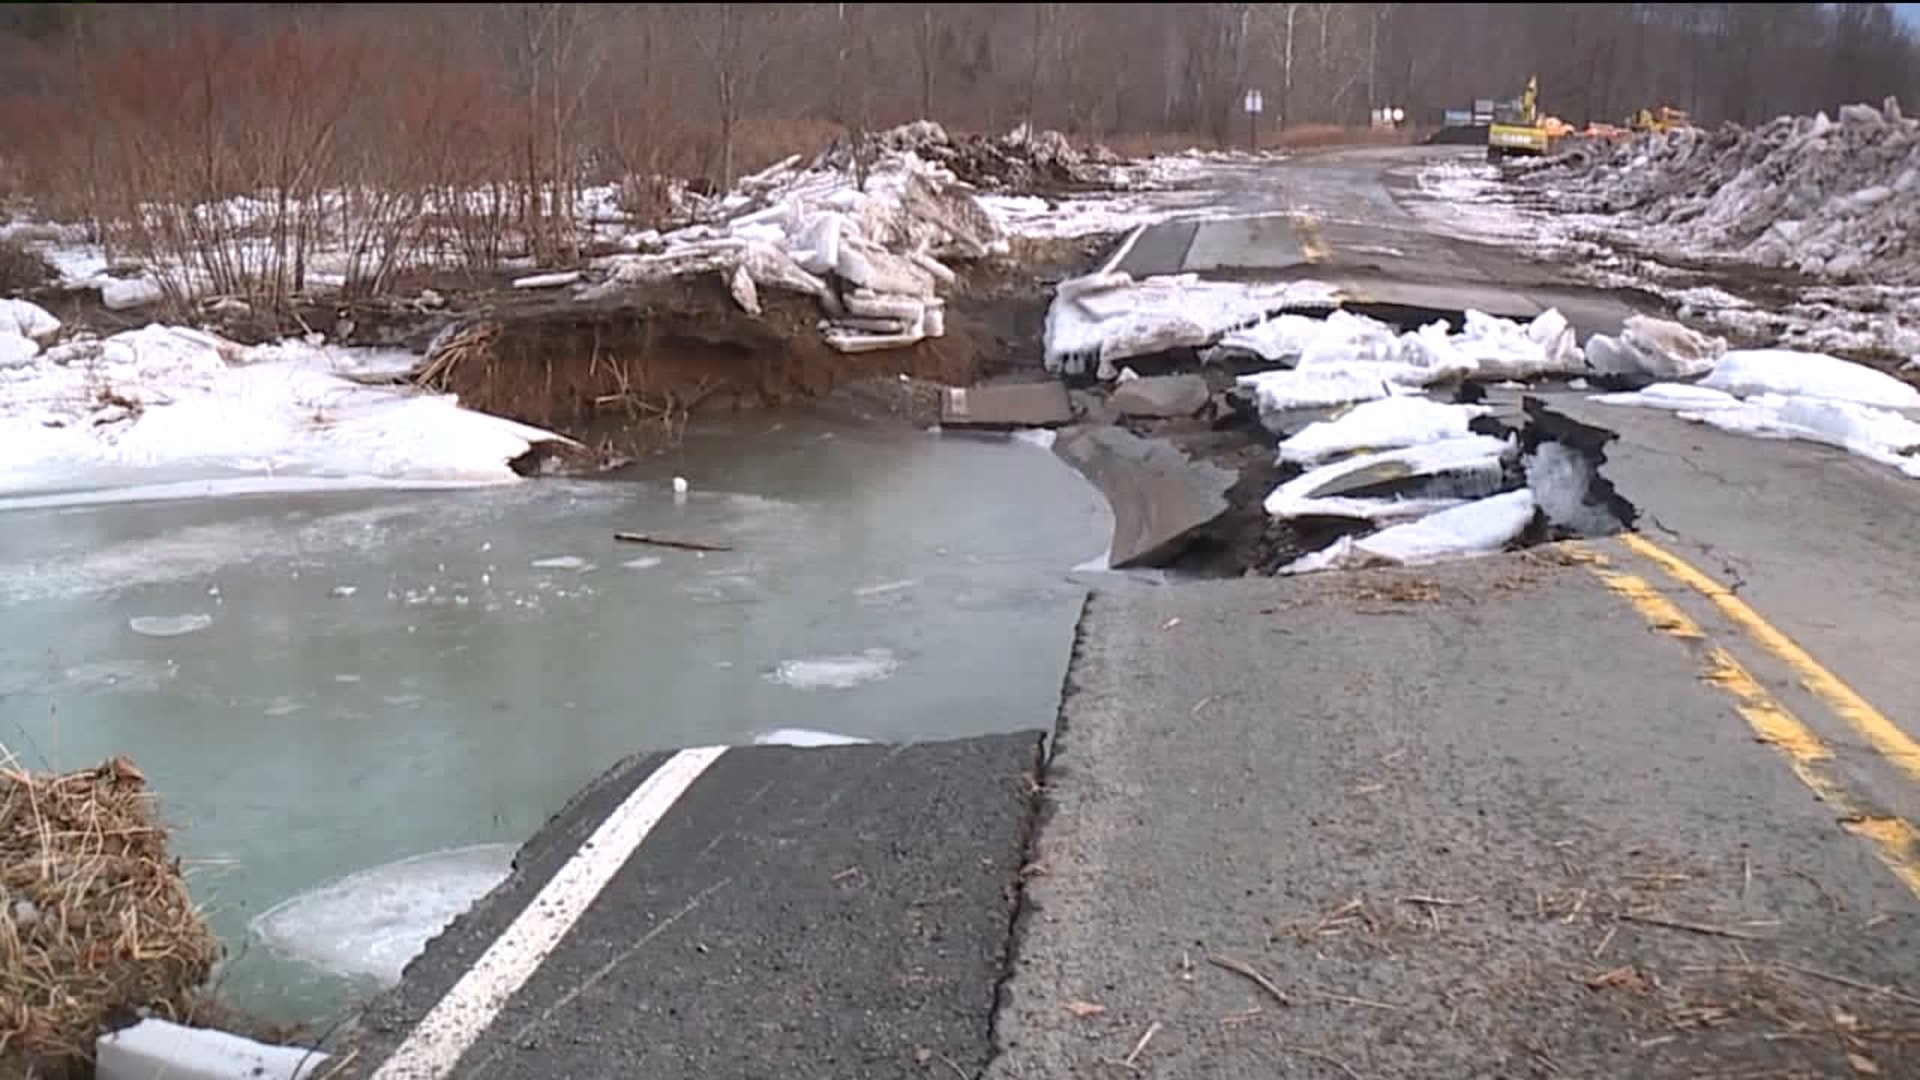 Damage from Ice Jam Closes Part of Route 170 in Wayne County